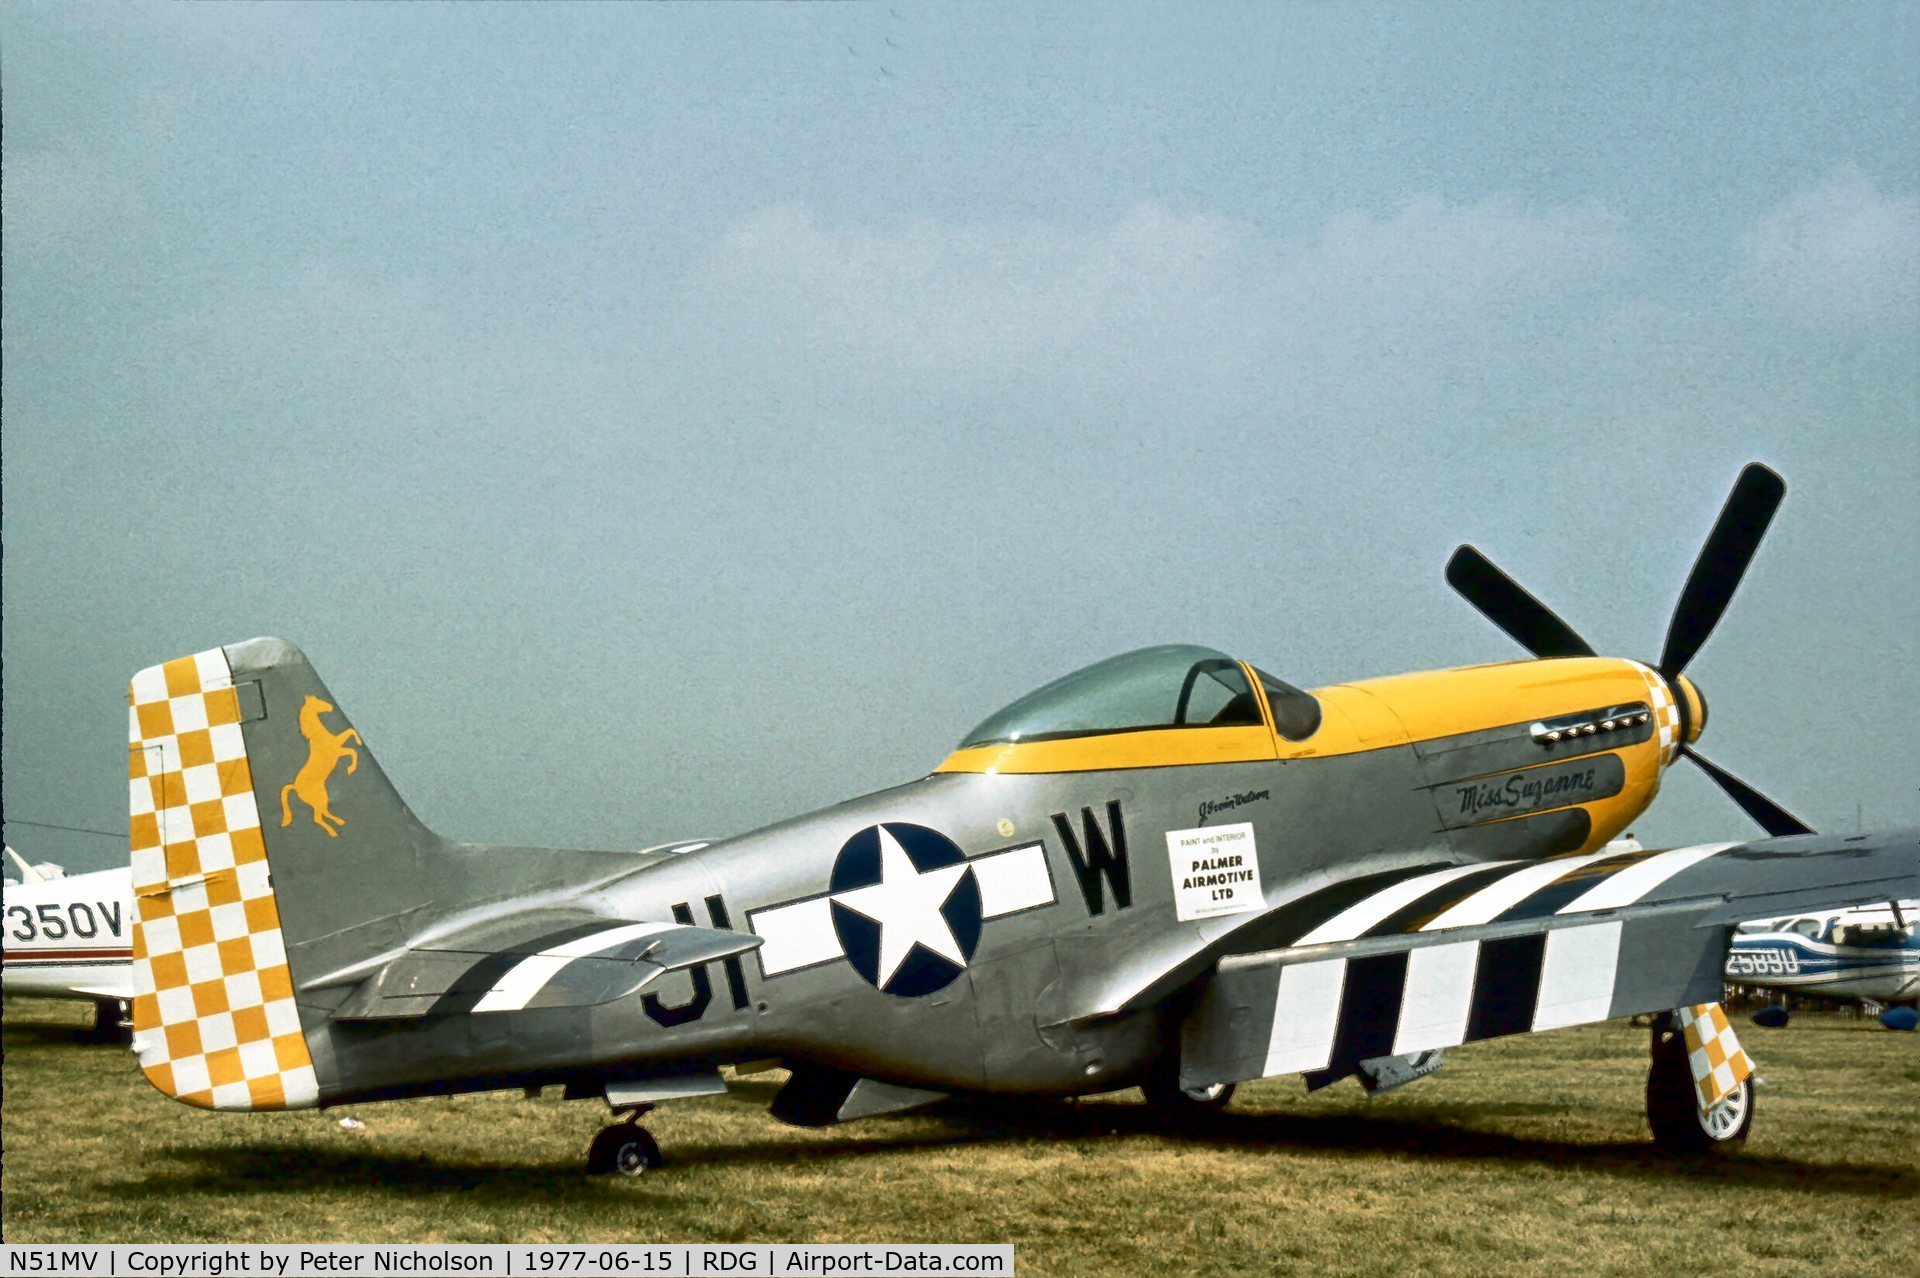 N51MV, 1945 North American F-51D Mustang C/N 45-11391, Displayed at the 1977 Reading Airshow when it was 